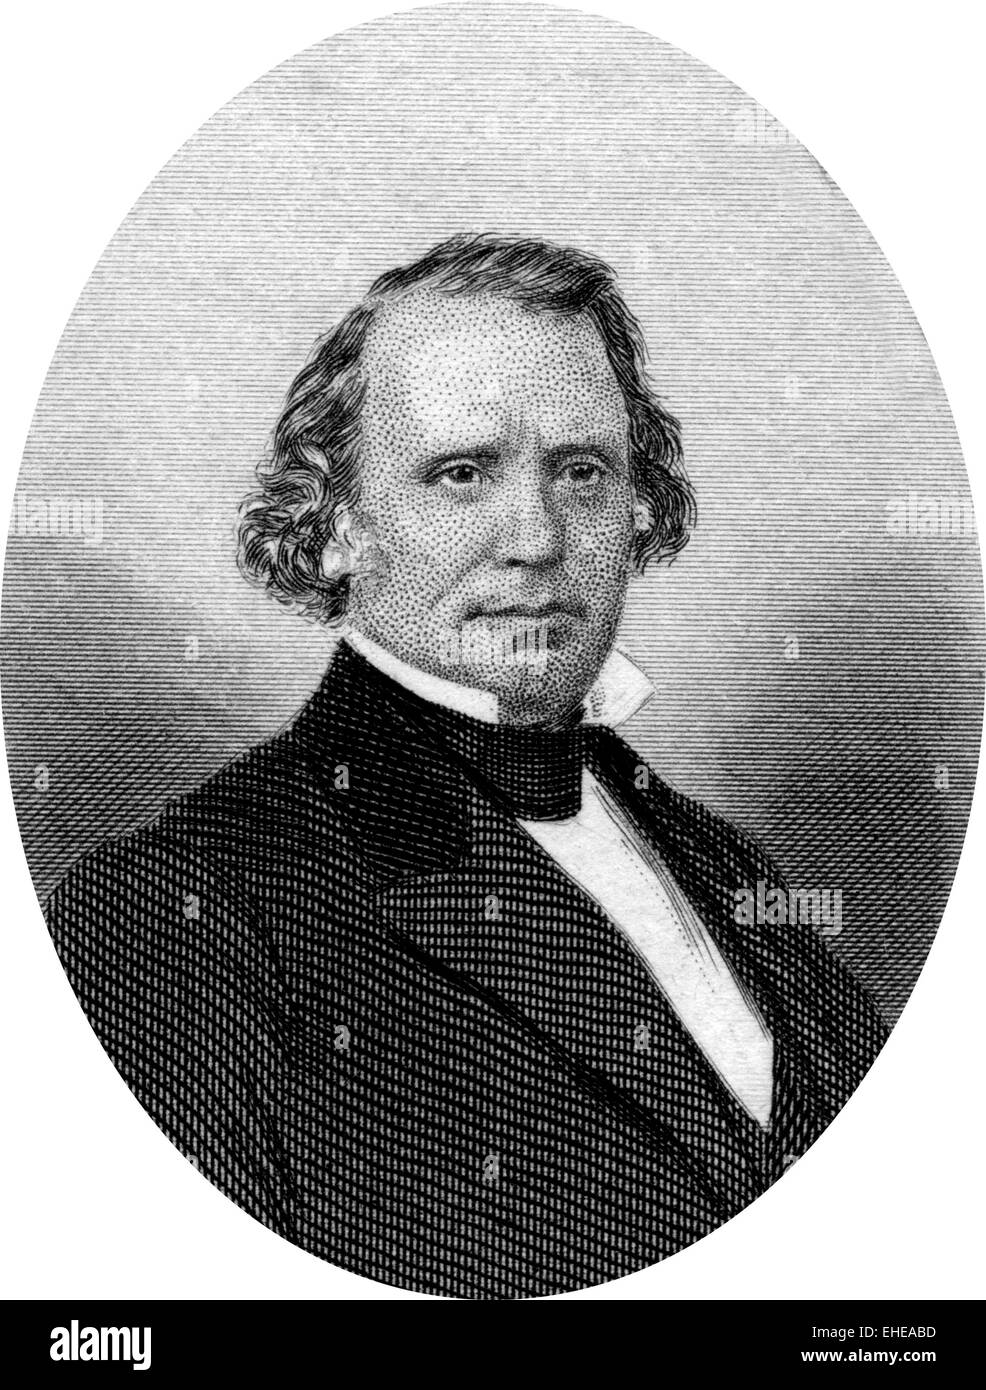 Engraving of Henry Wilson (16 February 1812 – 22 November 1875), the 18th Vice President of the United States Stock Photo